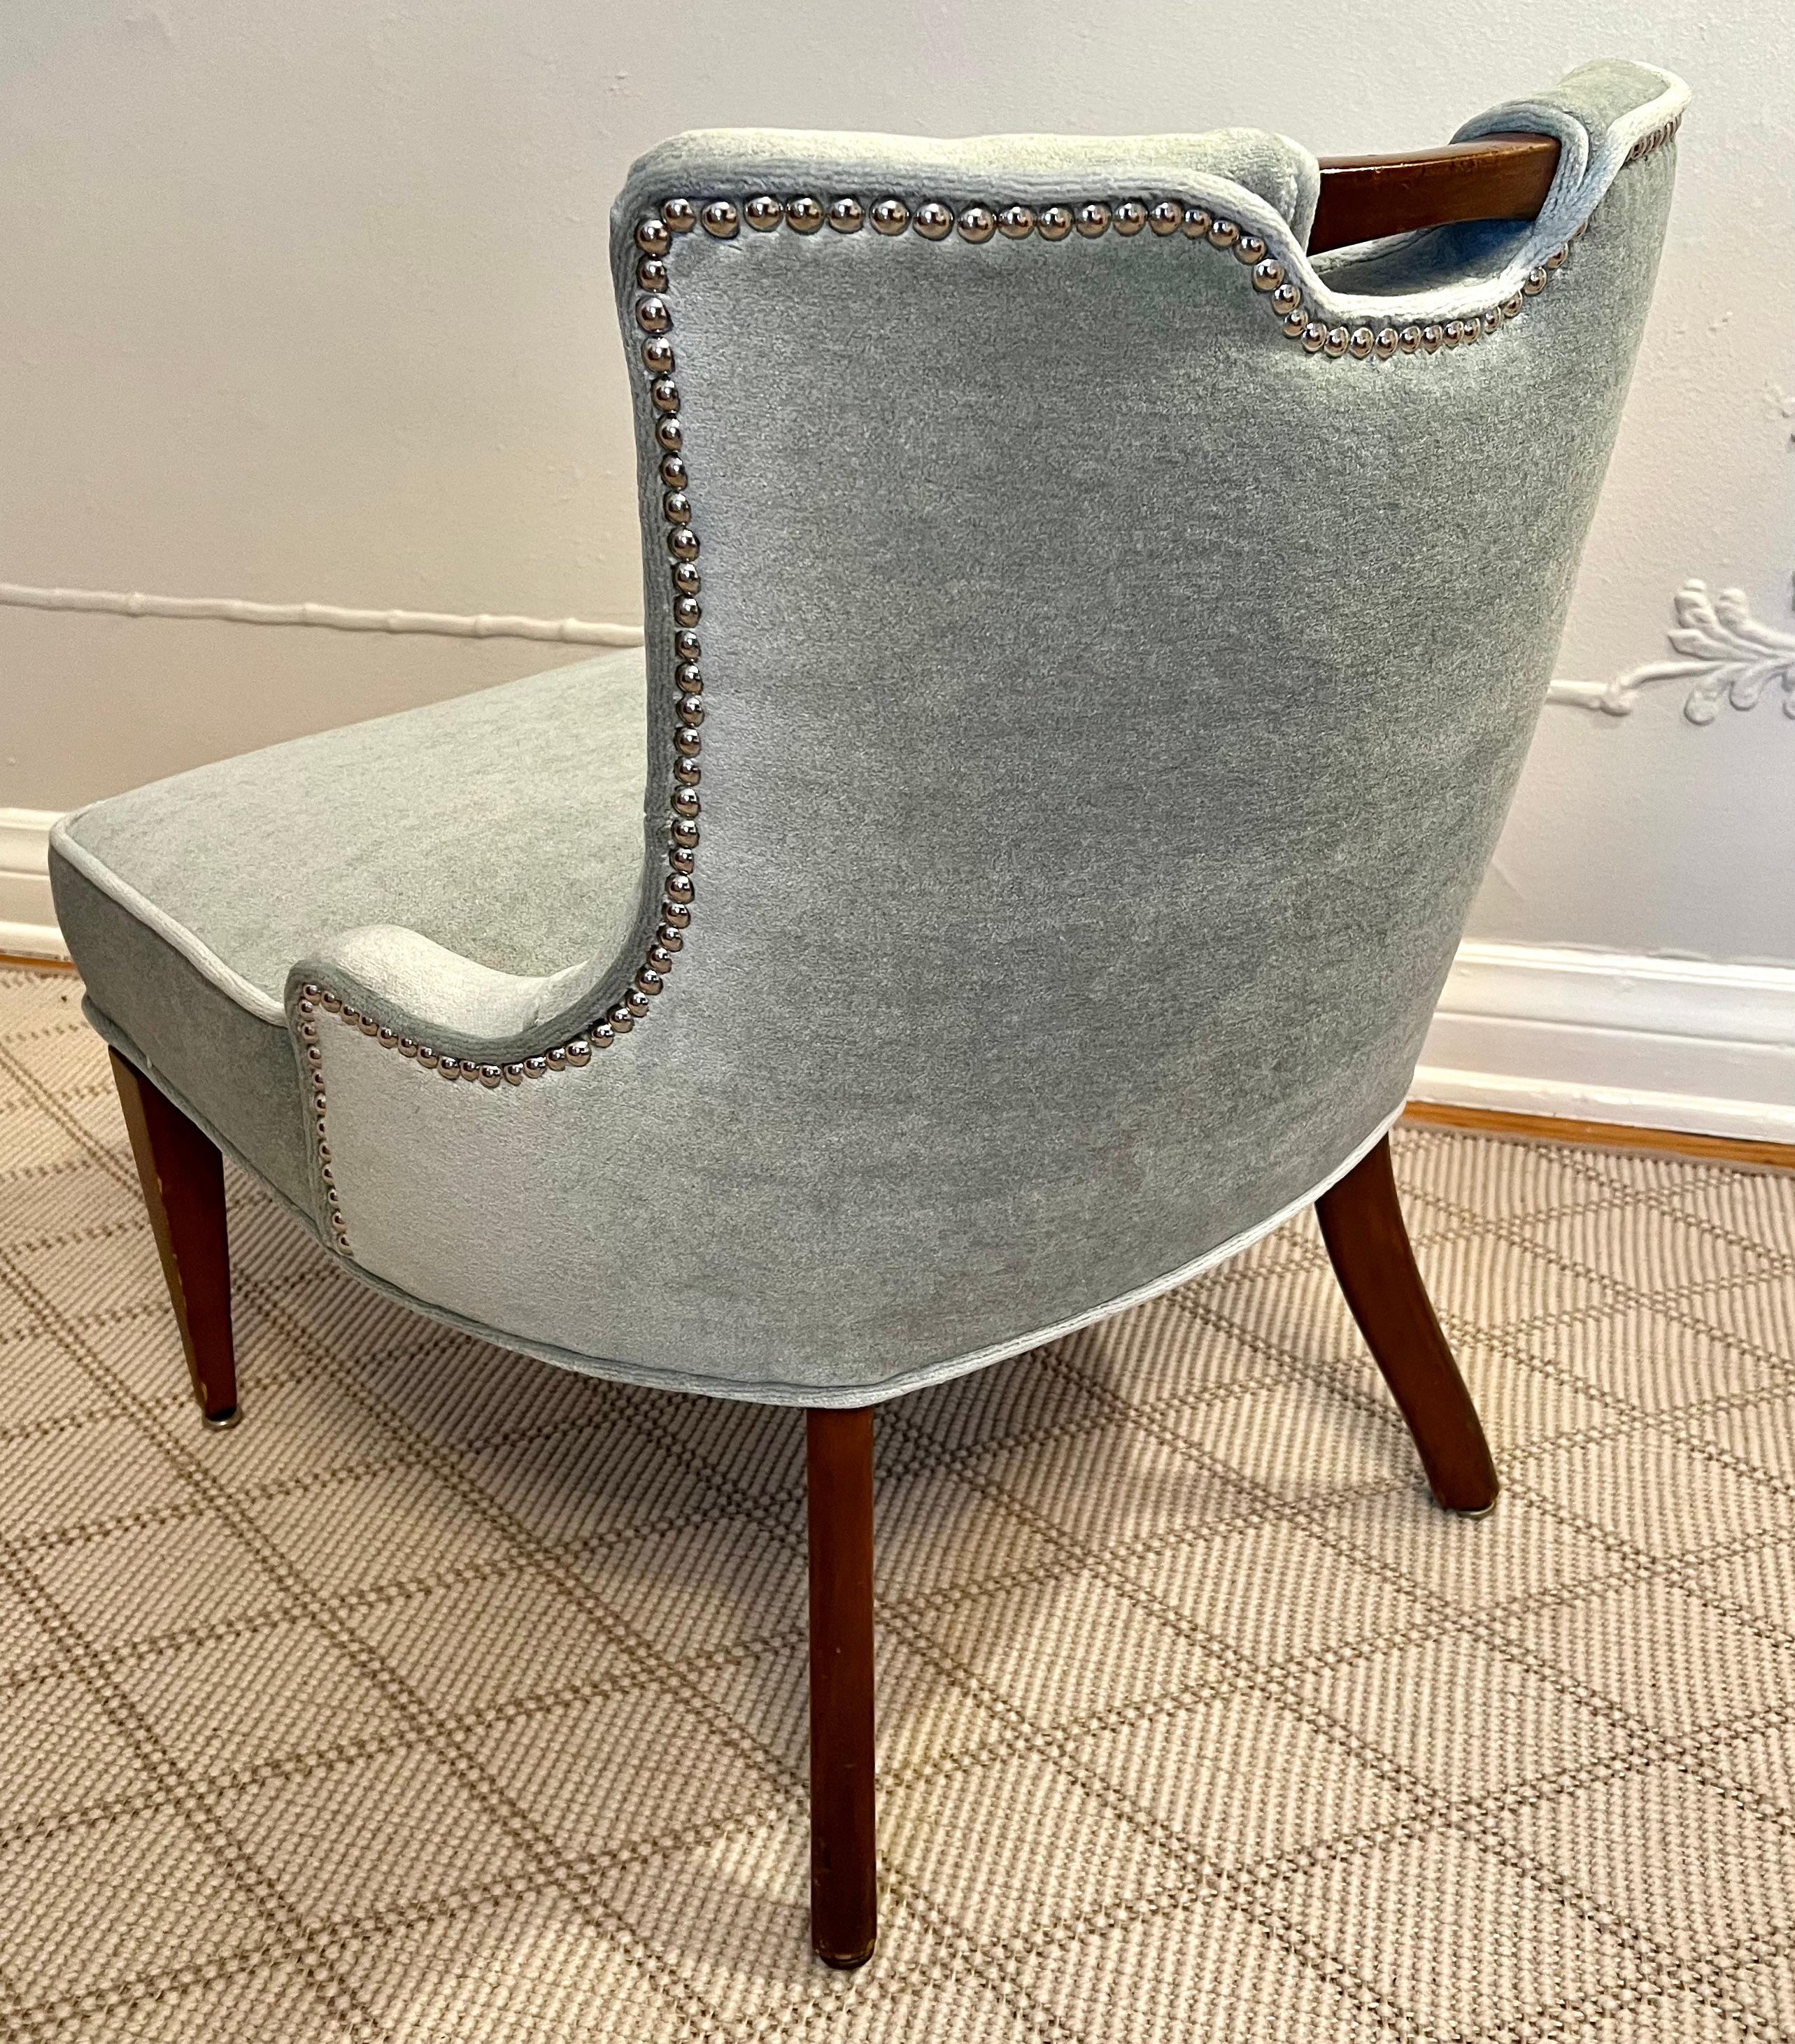 20th Century Vanity Chair Upholstered in Mohair with Wood Handle and Nail Details